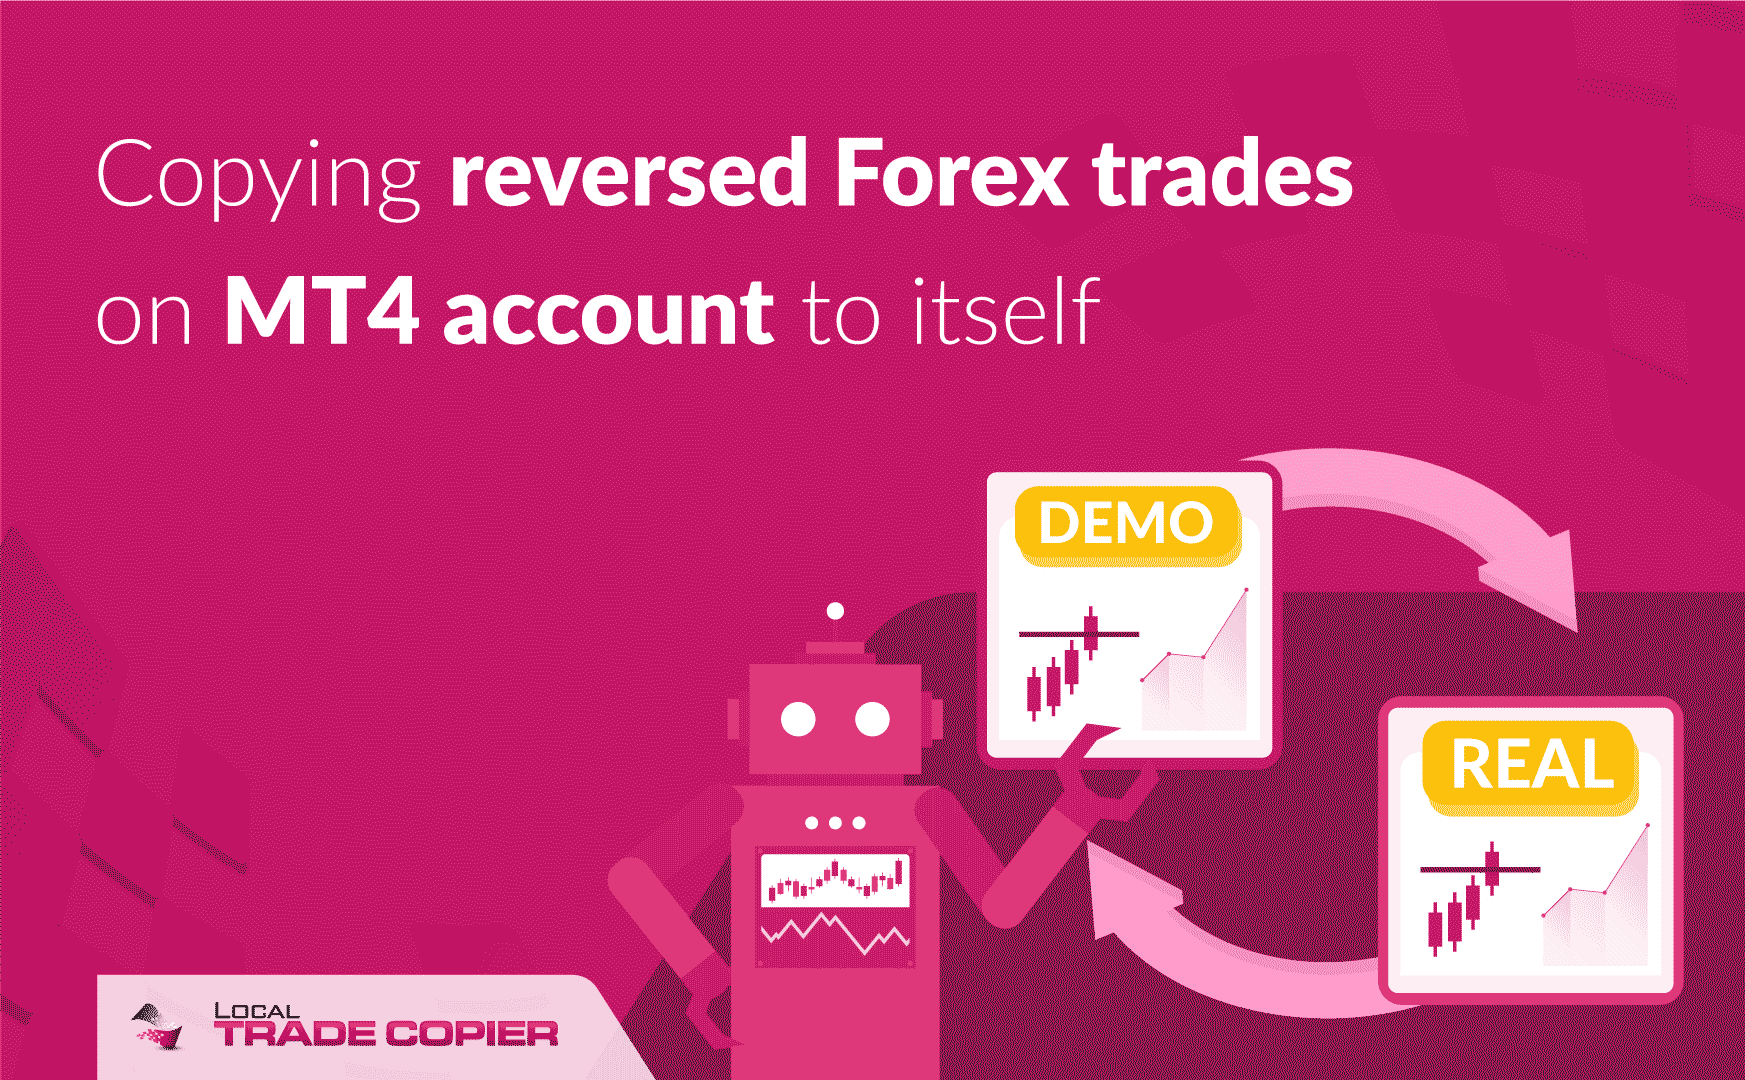 Local-Trade-Copier-Tutorials-copying-reversed-forex-trades-on-mt4-account-to-itself-1745x1080